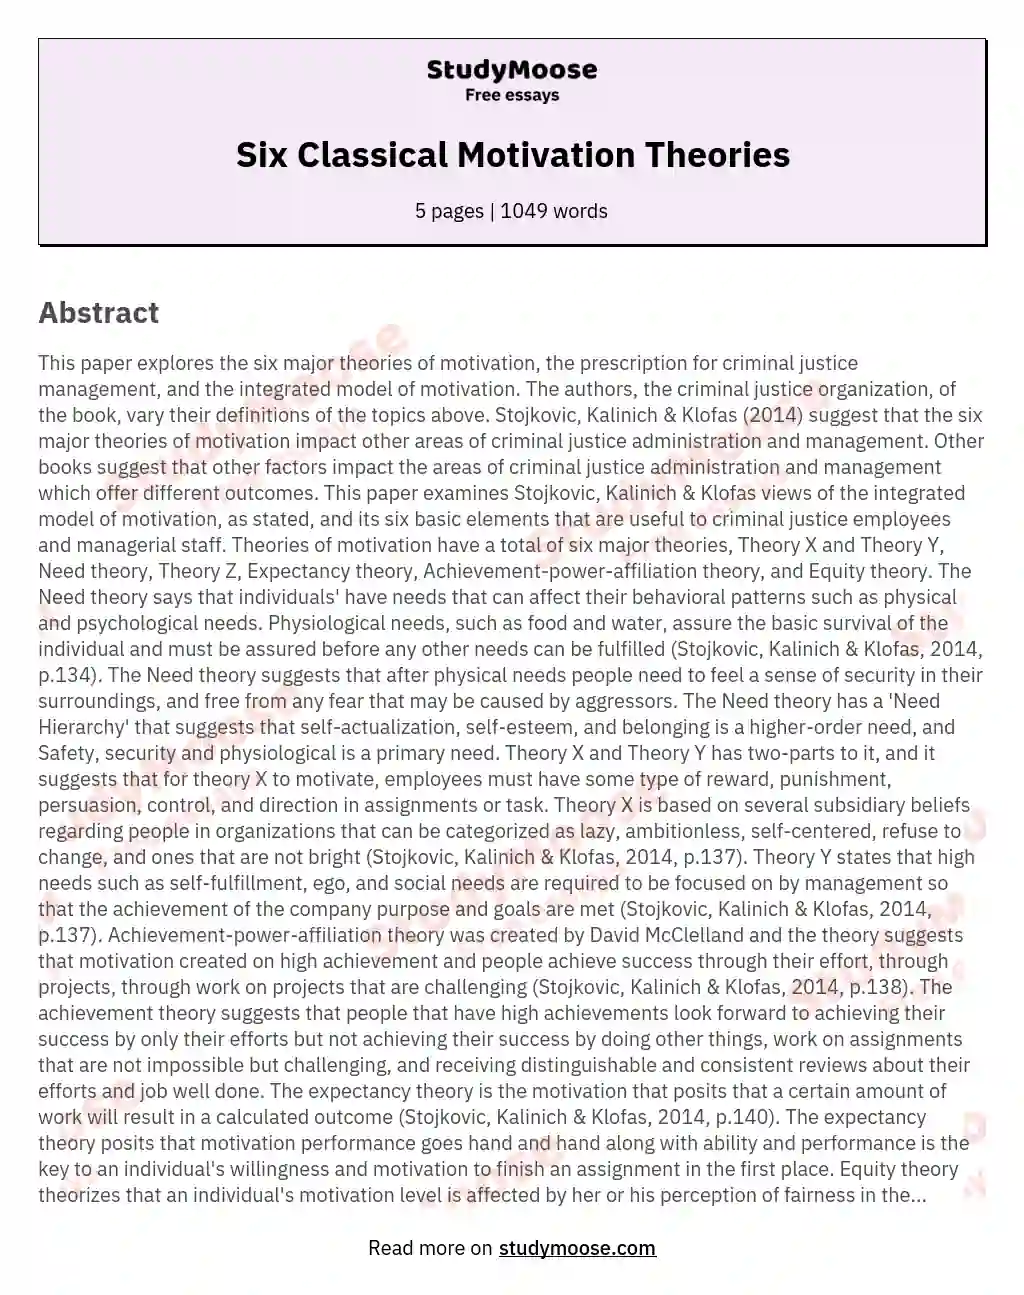 Six Classical Motivation Theories